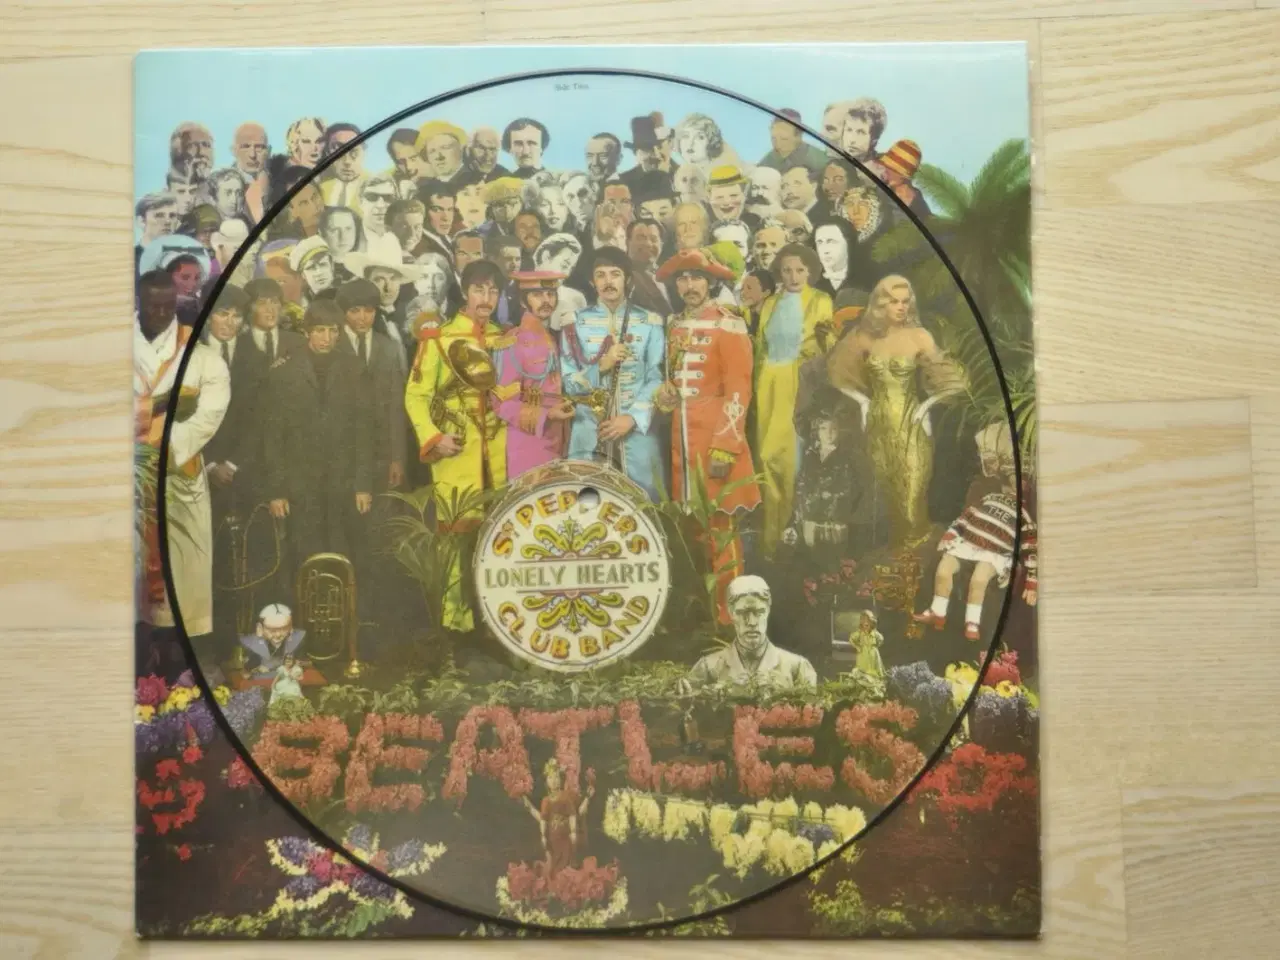 Billede 4 - Sgt. Pepper Lonely Hearts Club Band